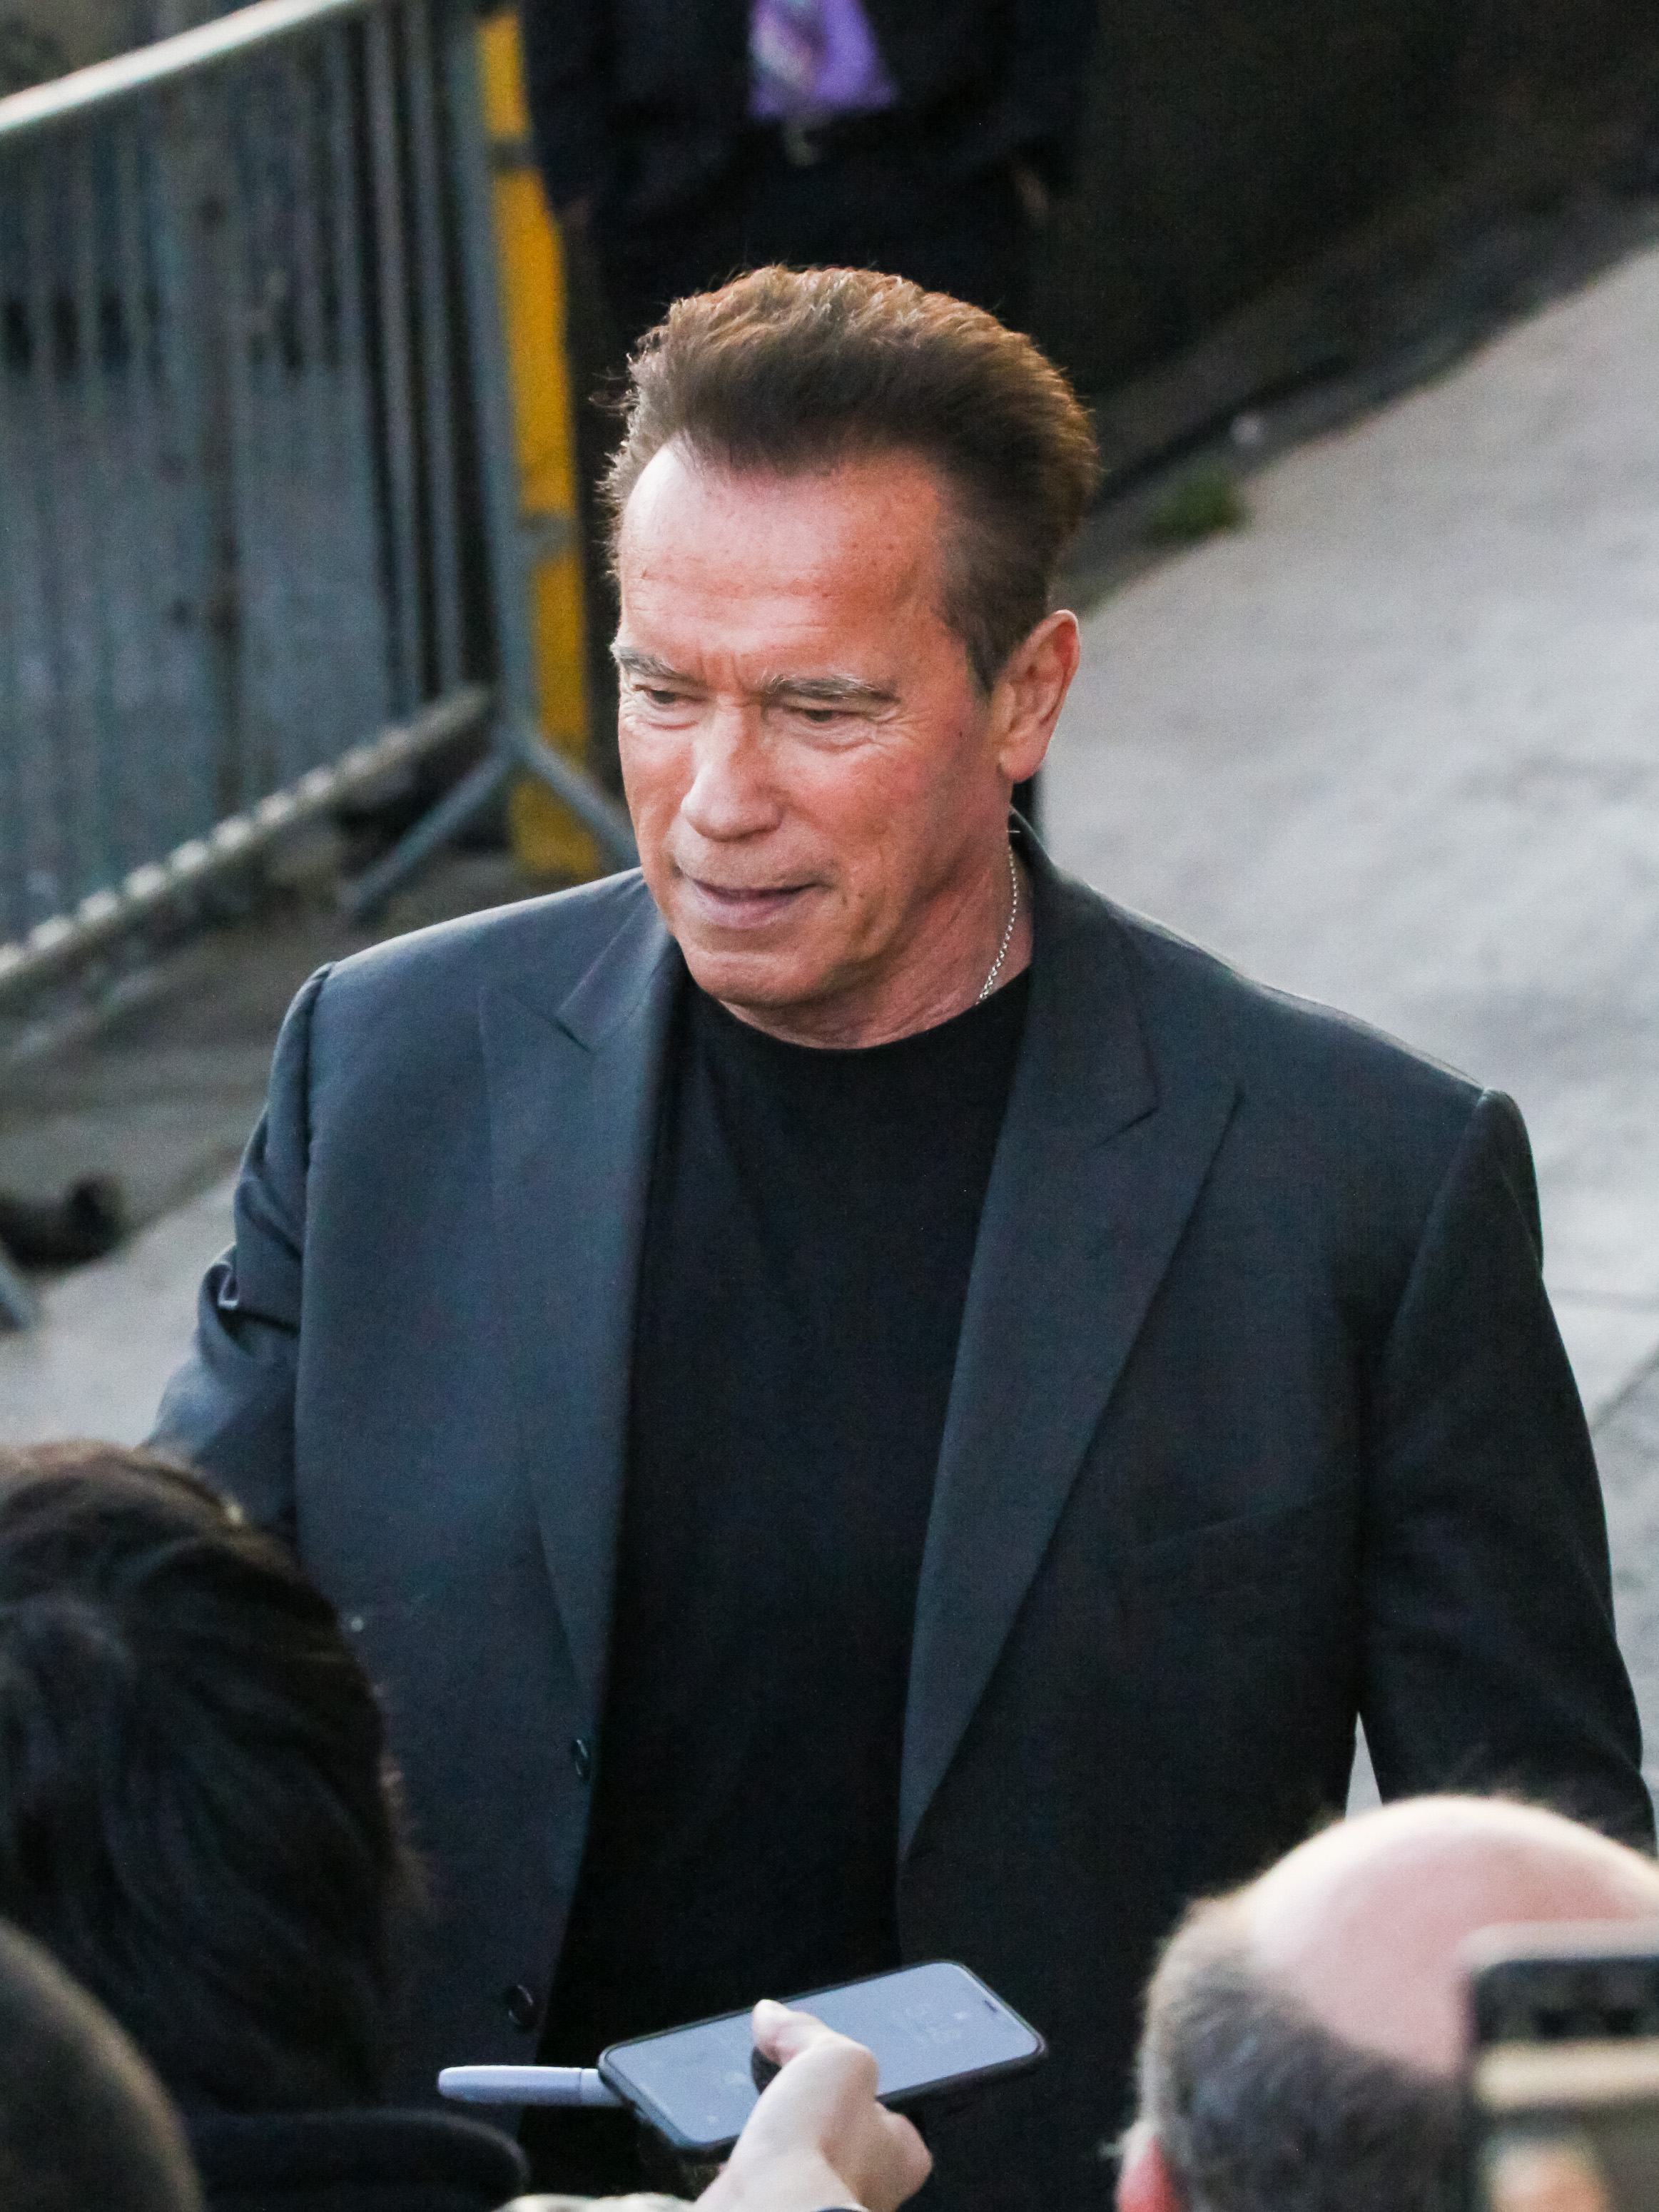 Arnold Schwarzenegger arriving at "Jimmy Kimmel Live" on October 28, 2019 in Los Angeles, California| Source: Getty Images